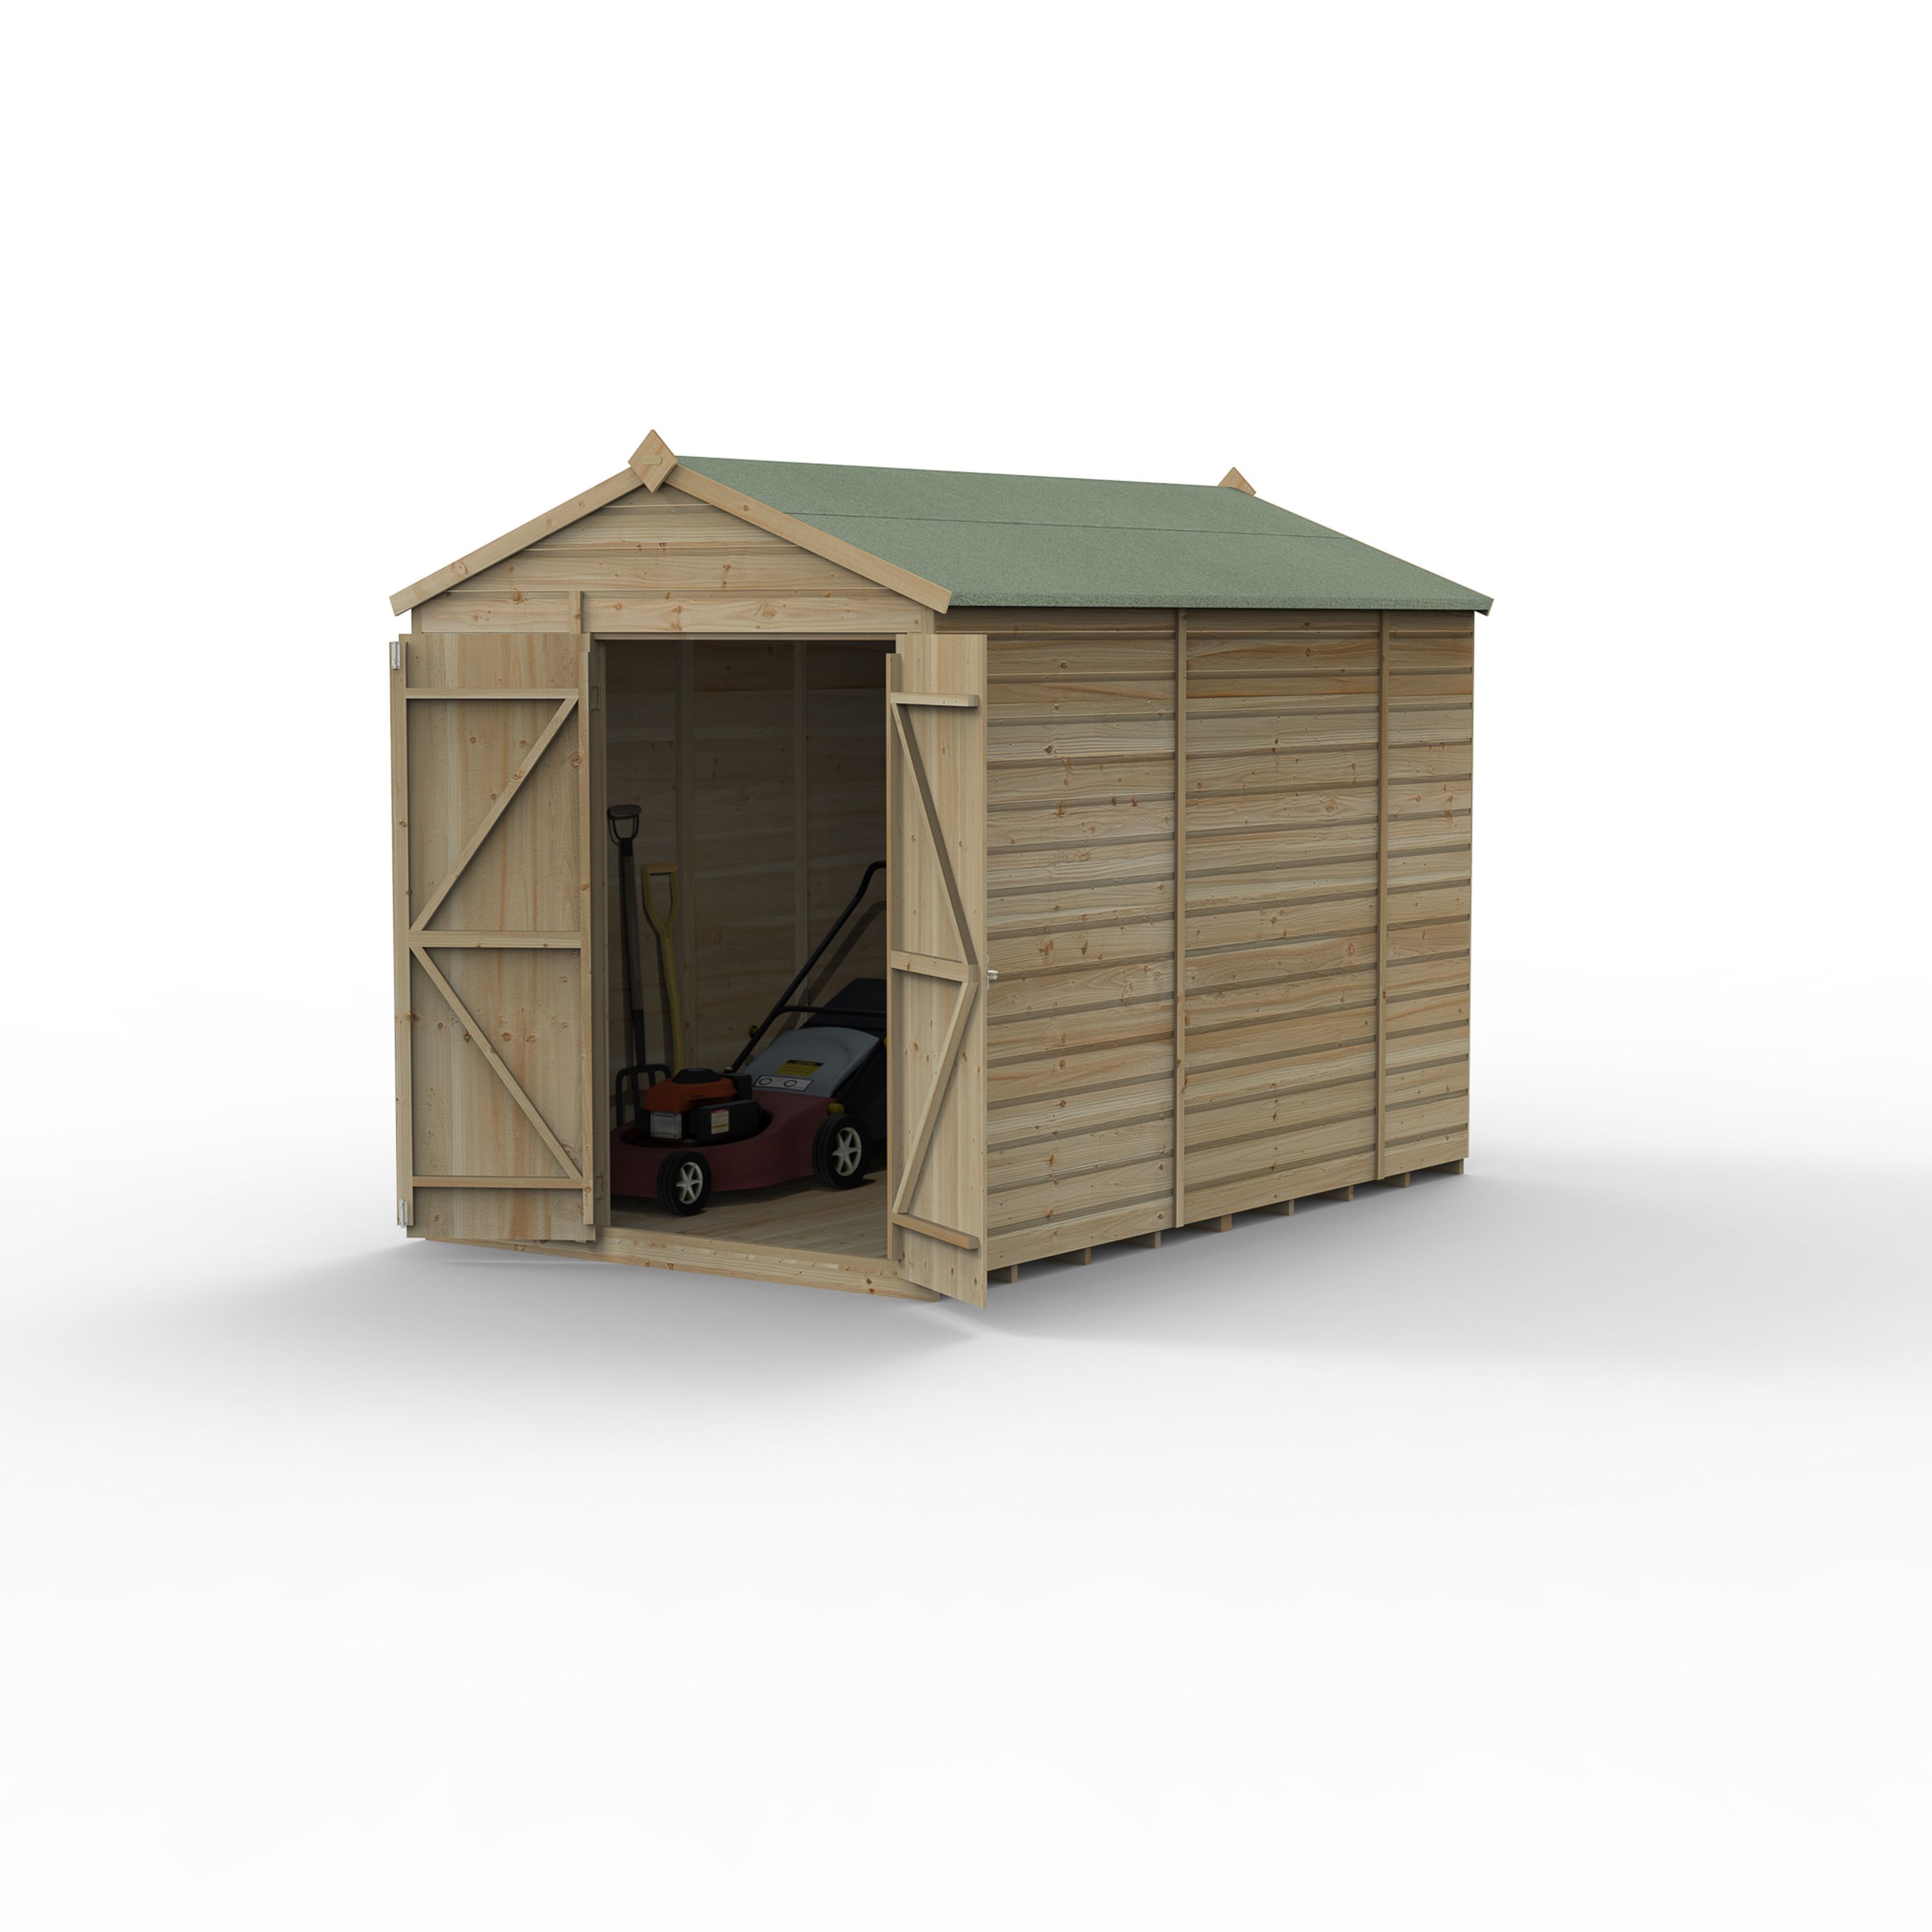 Forest Garden Beckwood 10x6 ft Apex Natural timber Wooden 2 door Shed with floor (Base included) - Assembly not required